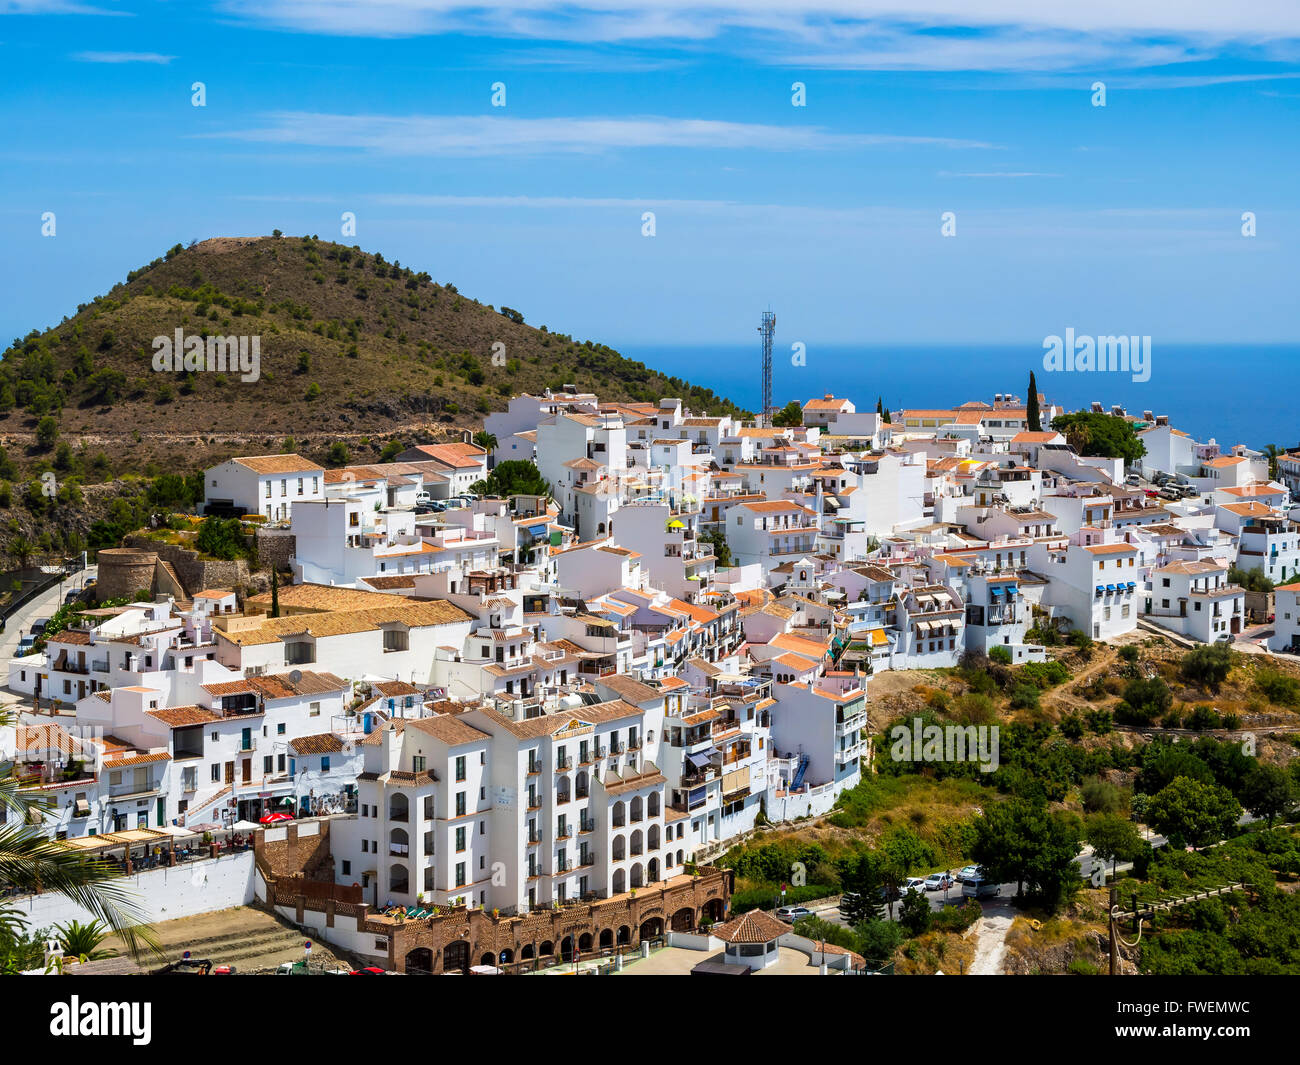 View of white houses in Frigiliana, Costa del Sol, Andalucía, Spain Stock Photo